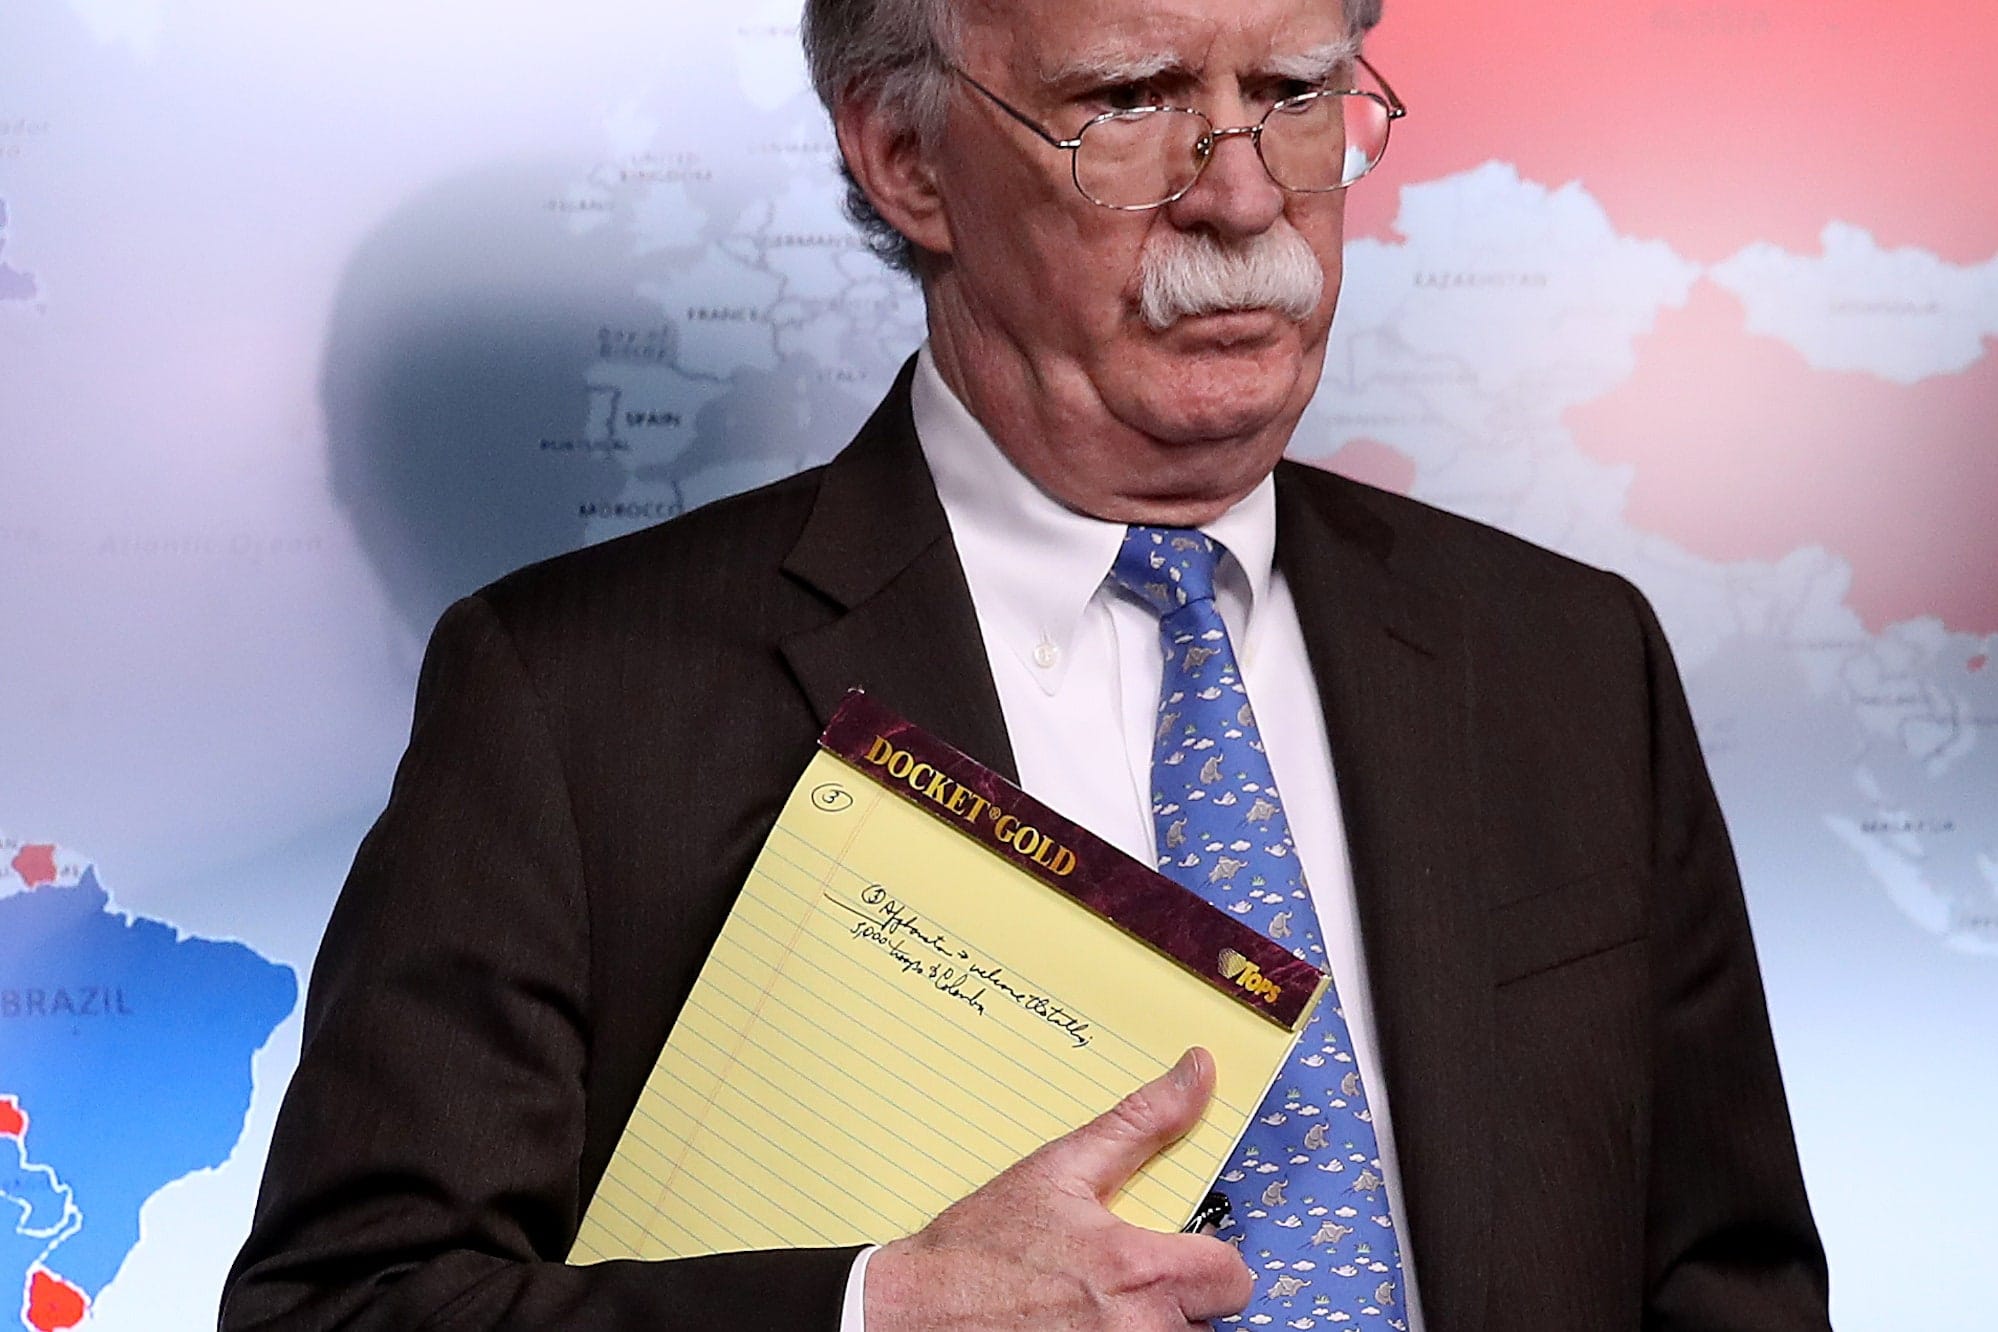 John Bolton holding a notepad with a handwriting mentioning the need to move 5000 troops to Colombia. One of Bolton's "biggest achievements" as Trump's national security advisor. Photo by Win McNamee, Getty Images.